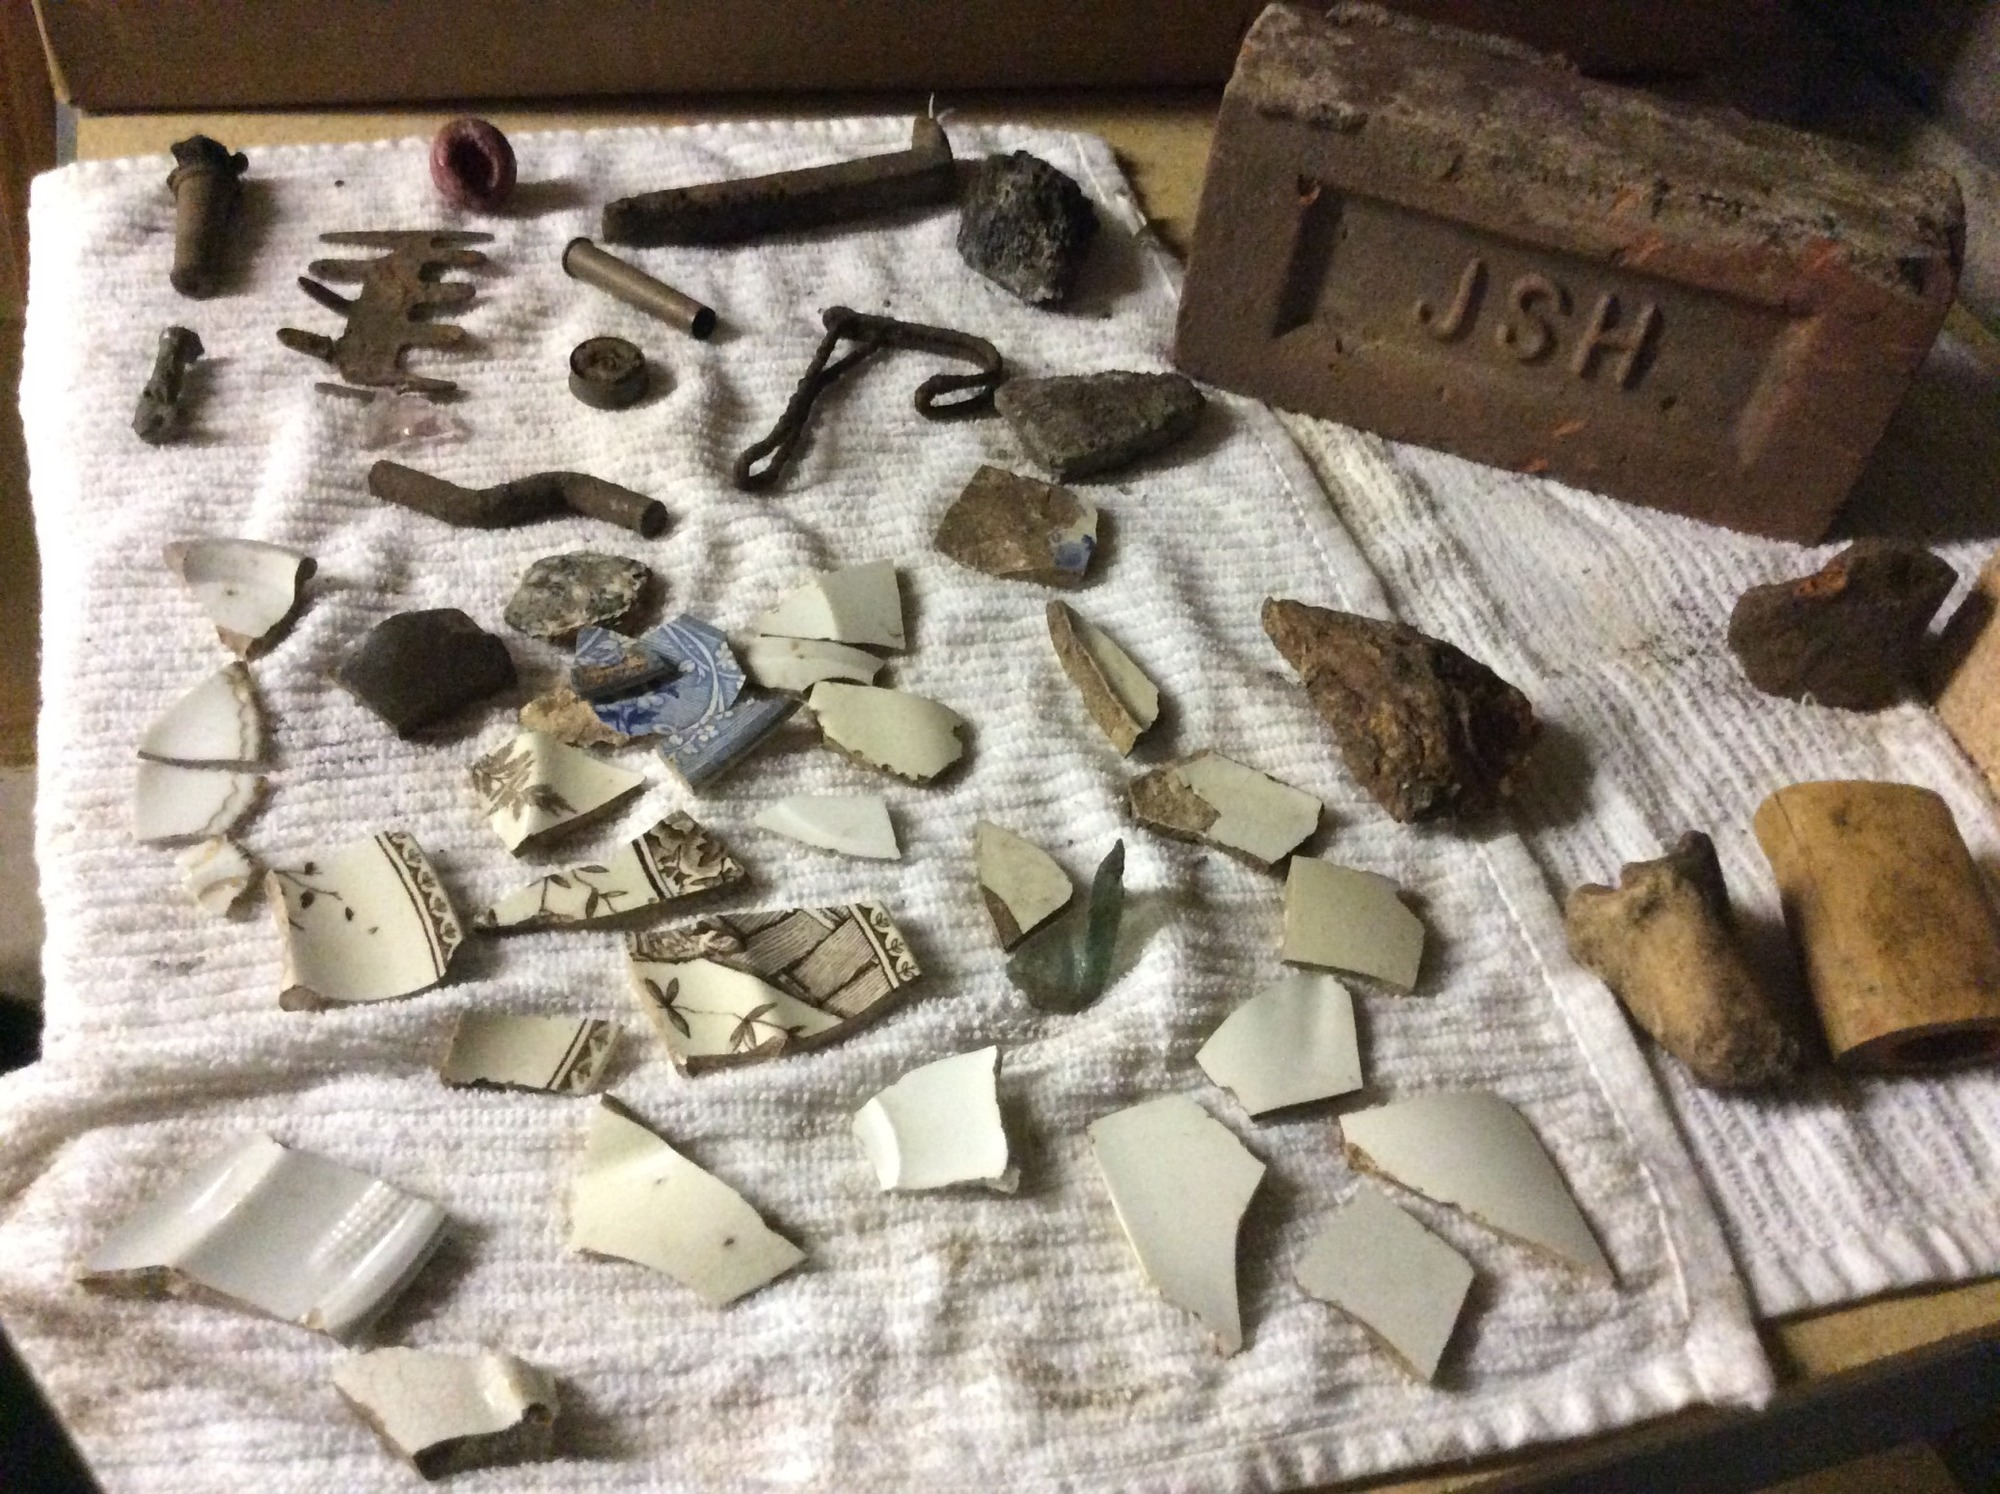 Some of the artifacts found in 2015 while researchers were trenching at the Copper Harbor Range Lights site.